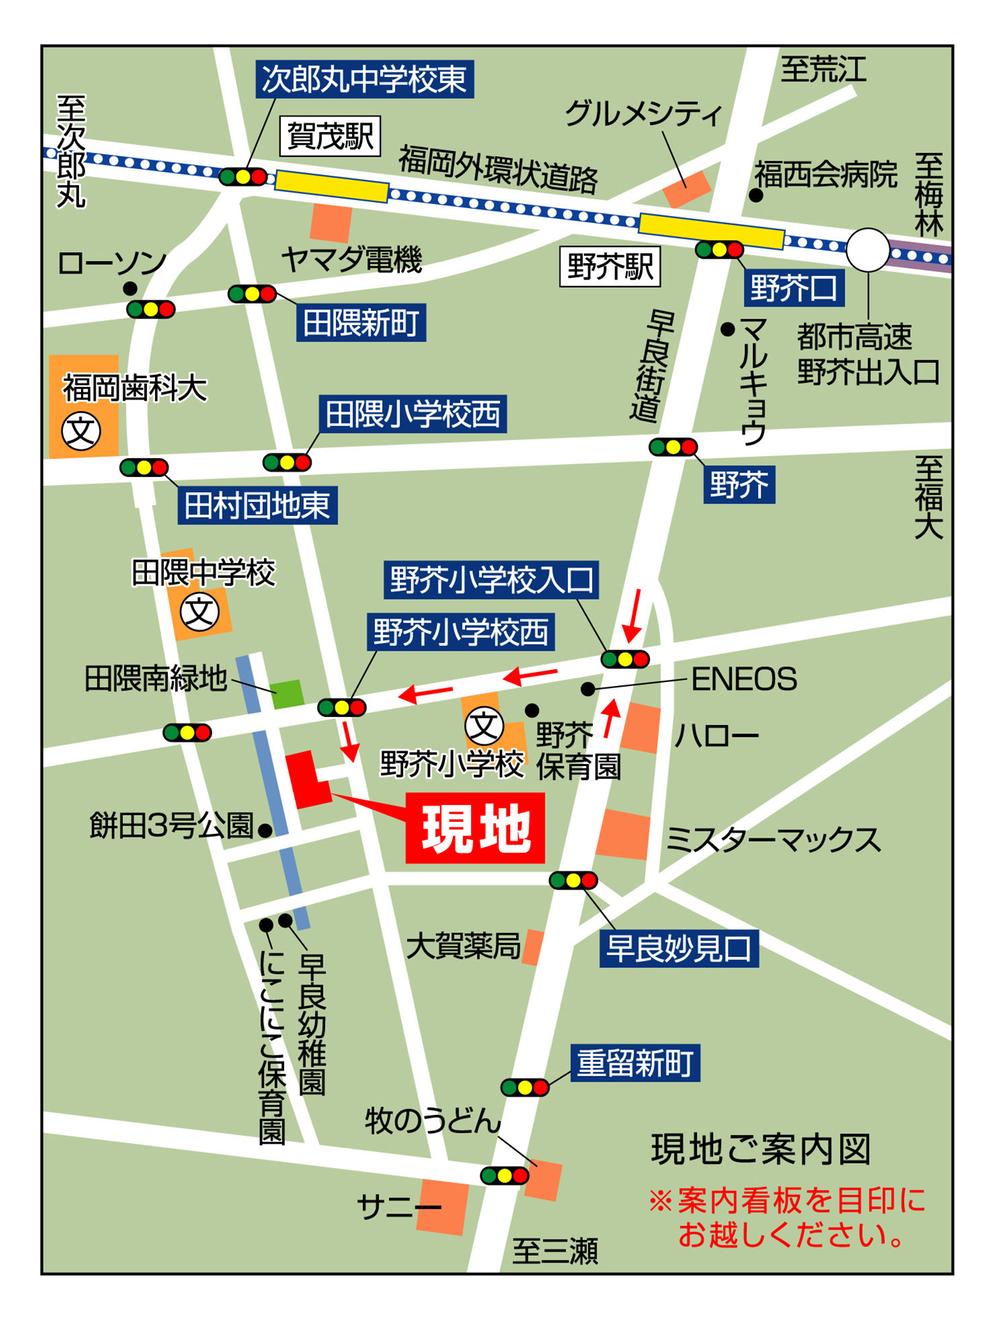 Local guide map. All 8 compartment close to the school, It is child-rearing-friendly town!